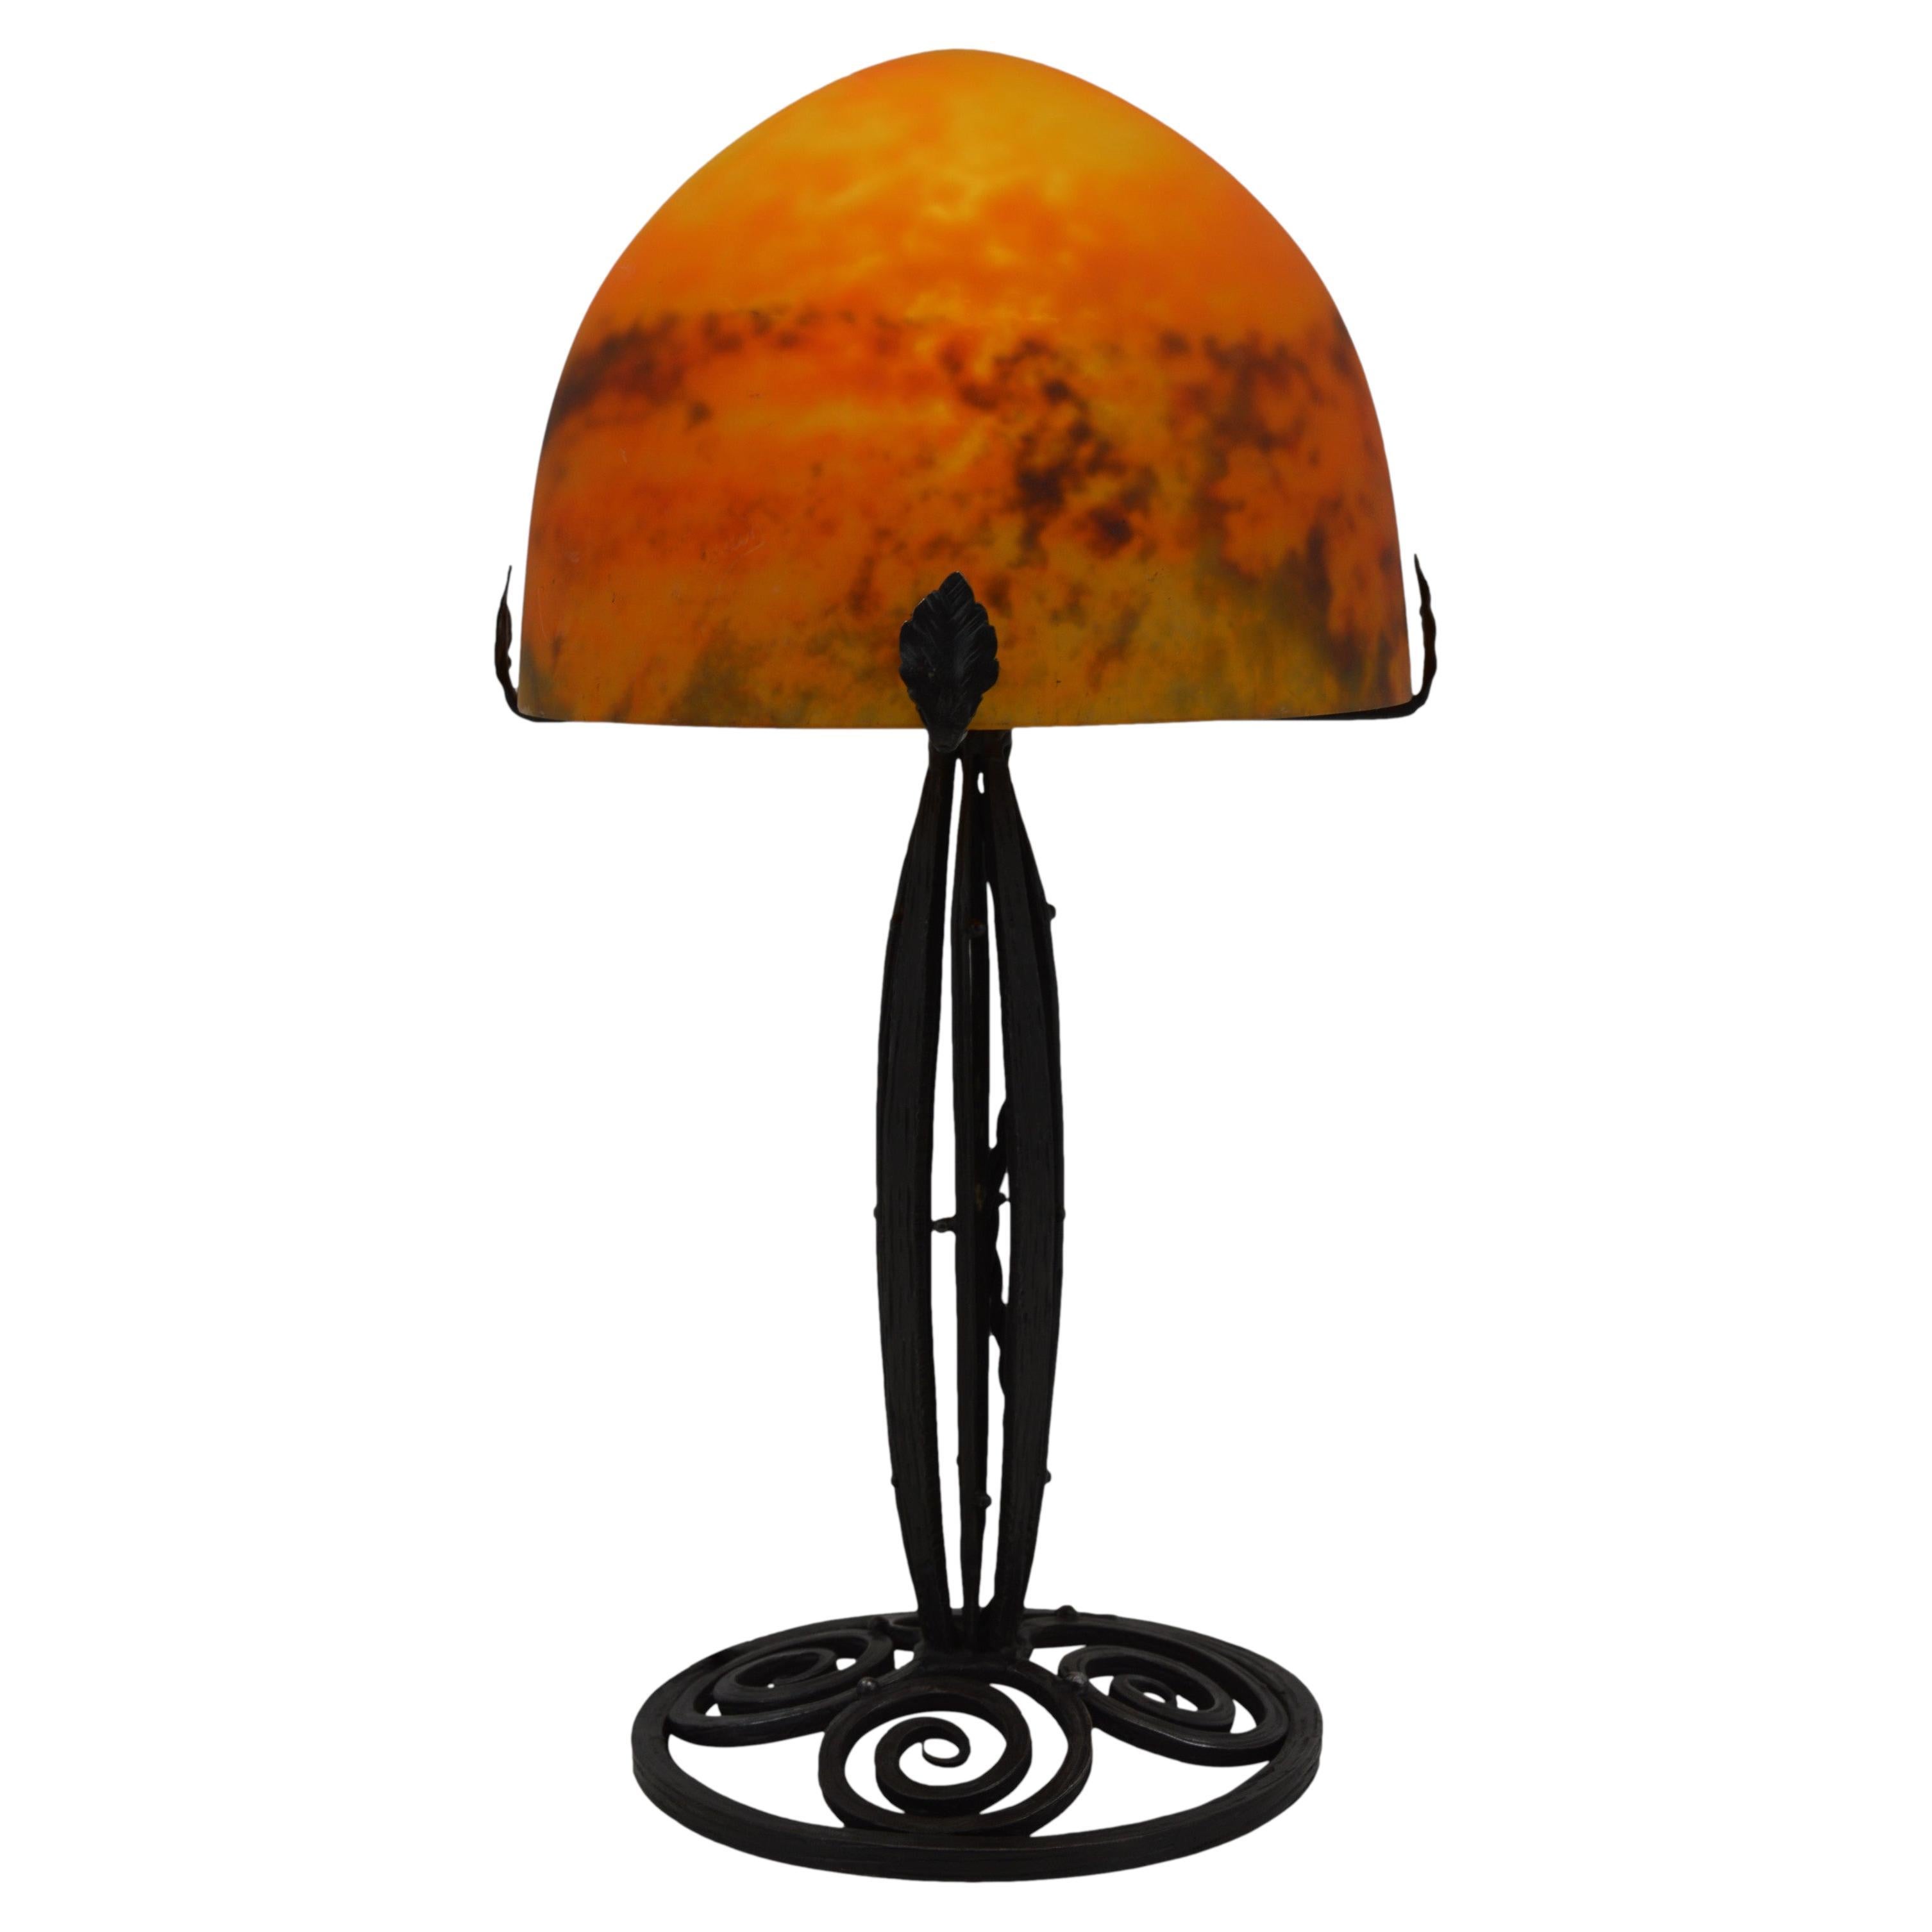 Daum French Art Deco Table Lamp, Late 1920s